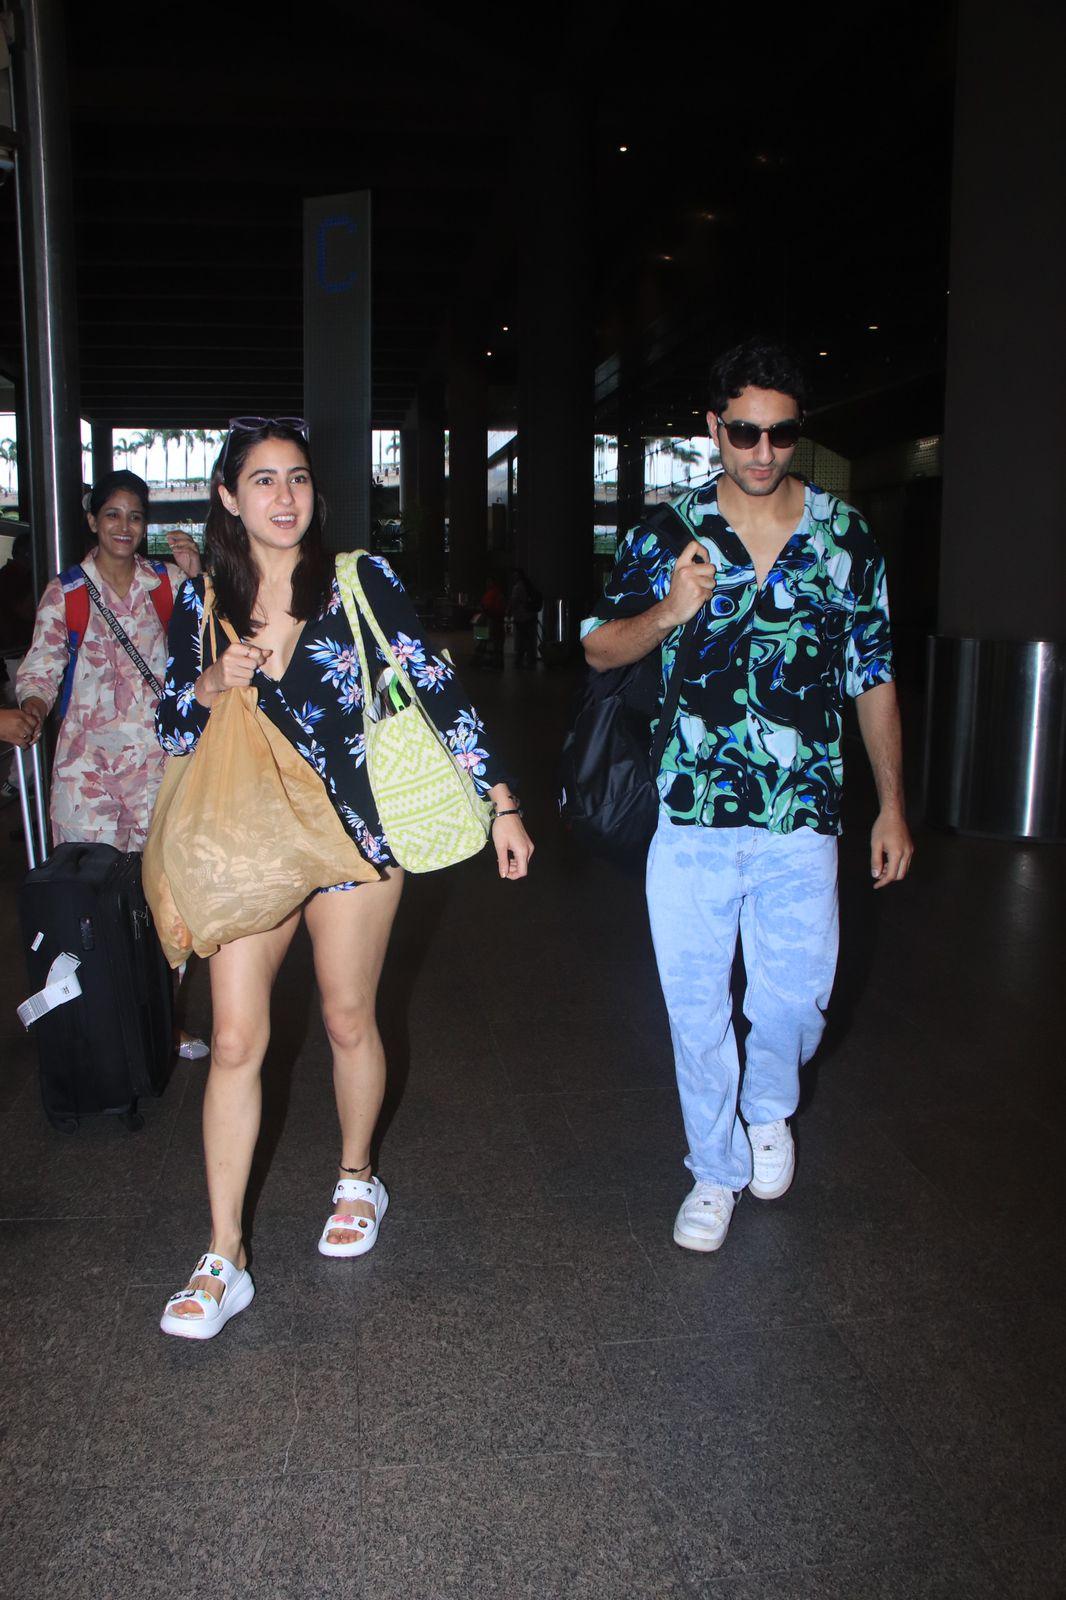 Ibrahim looked suave as in his black sunglasses. His ensemble matched in similar hues of blue. Sara looked happy to be back in Mumbai!